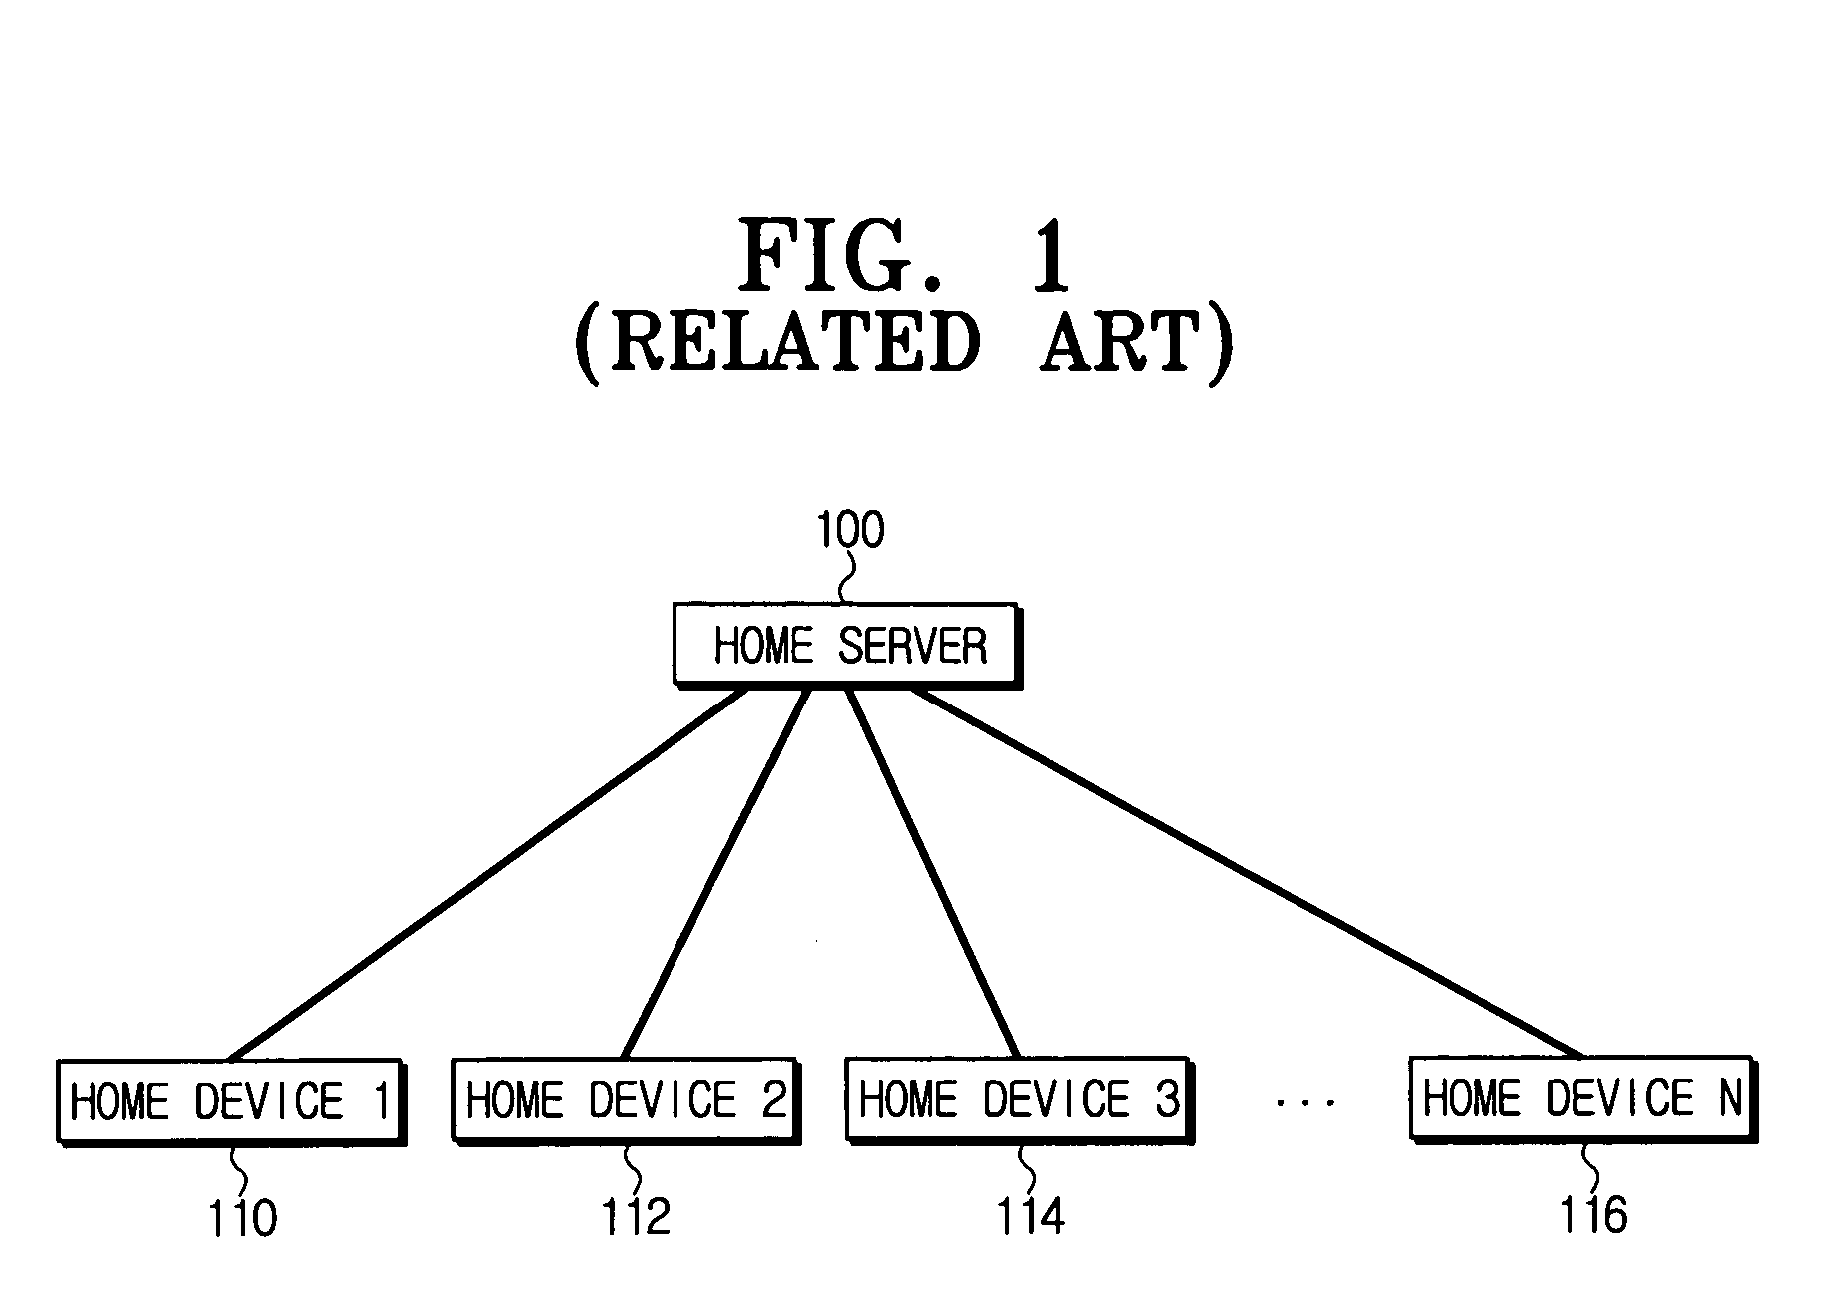 Method and apparatus for recognizing location of a home device using RFID